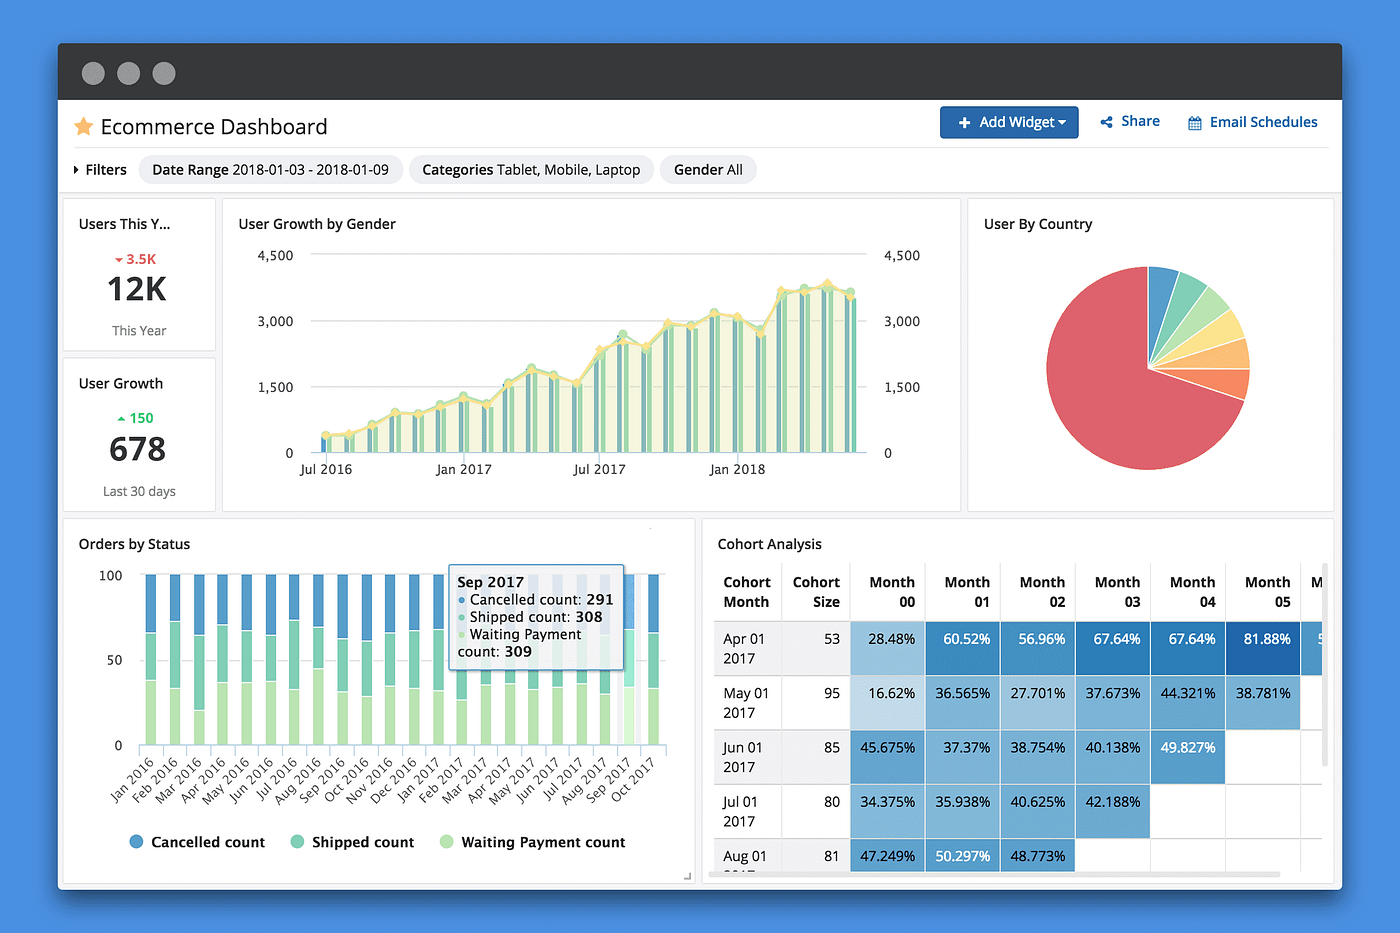 Blade - A free to use dashboard for open access to data about